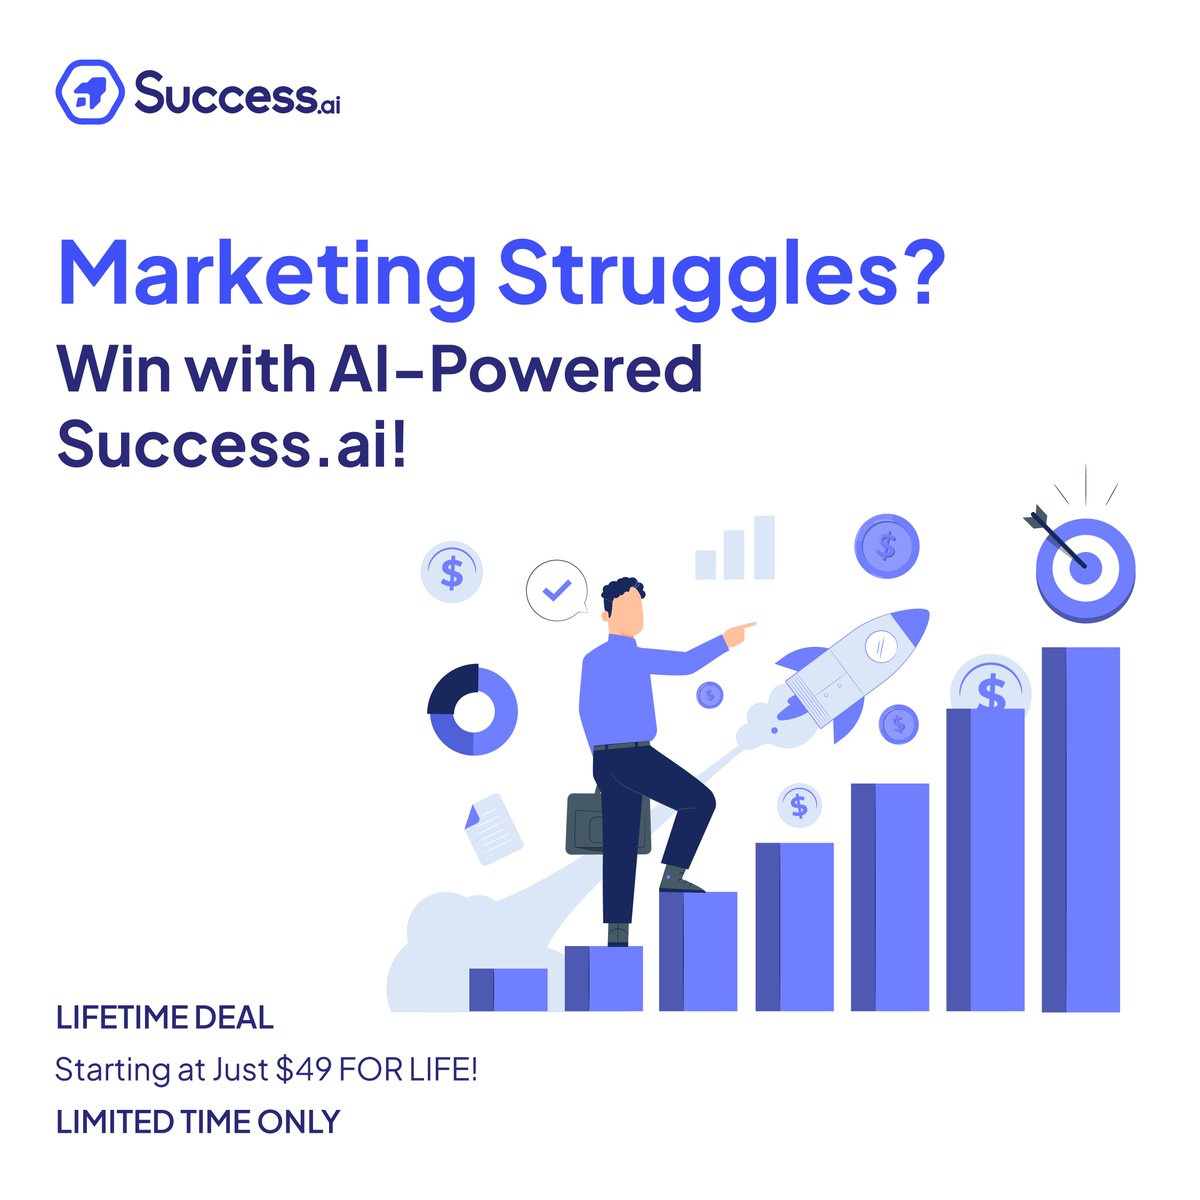 Marketing Struggles? Win with AI-Powered Success.ai!

Drive engagement, generate leads, and boost conversions with AI-powered solutions. Don't miss out - grab the lifetime deal now: appsumo.com/products/succe… 

 #leadgeneration #salesfunnel #successai #emailmarketing